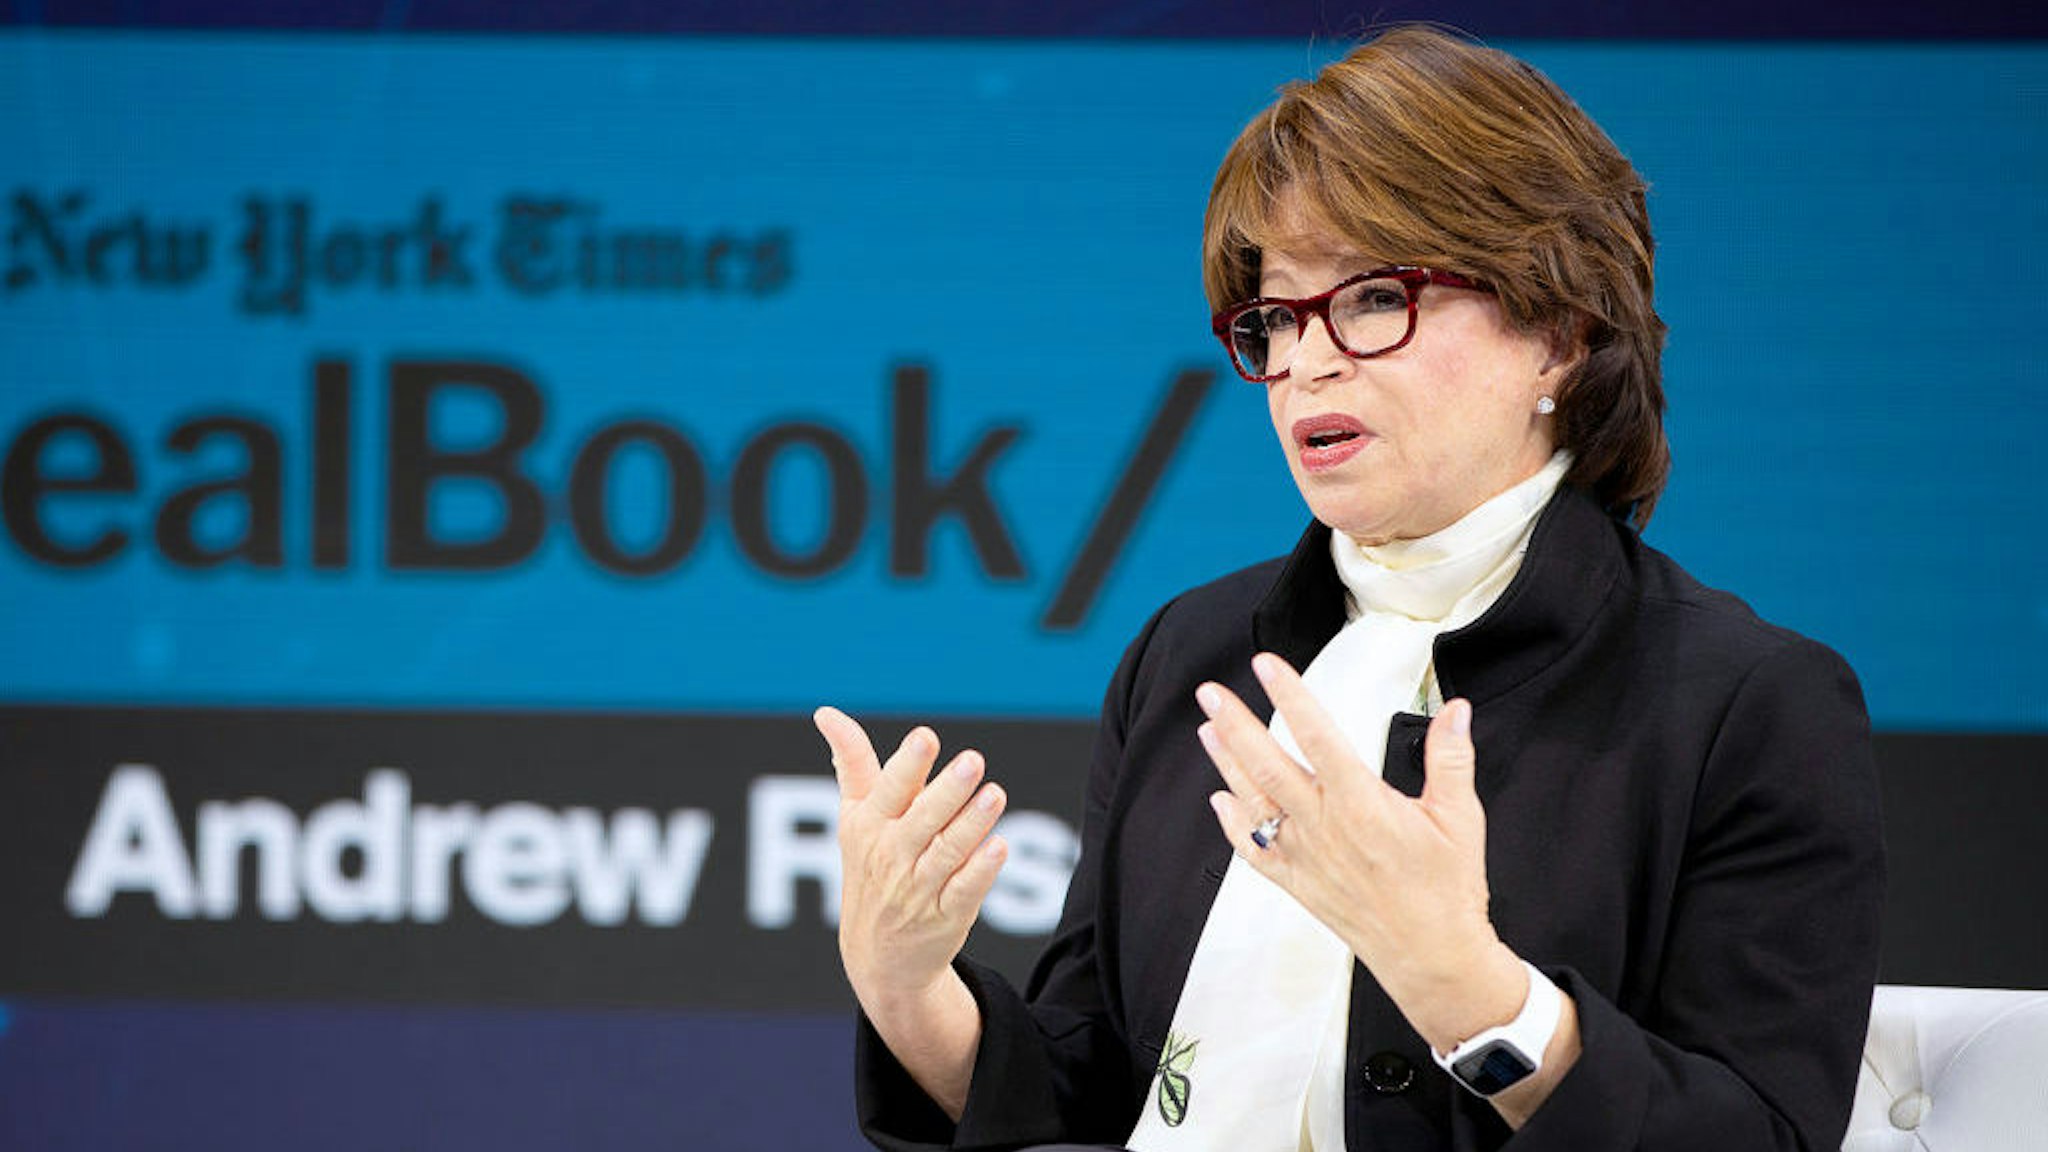 NEW YORK, NEW YORK - NOVEMBER 06: Valerie Jarrett, Board Chair of When We All Vote speaks onstage at 2019 New York Times Dealbook on November 06, 2019 in New York City. (Photo by Mike Cohen/Getty Images for The New York Times)